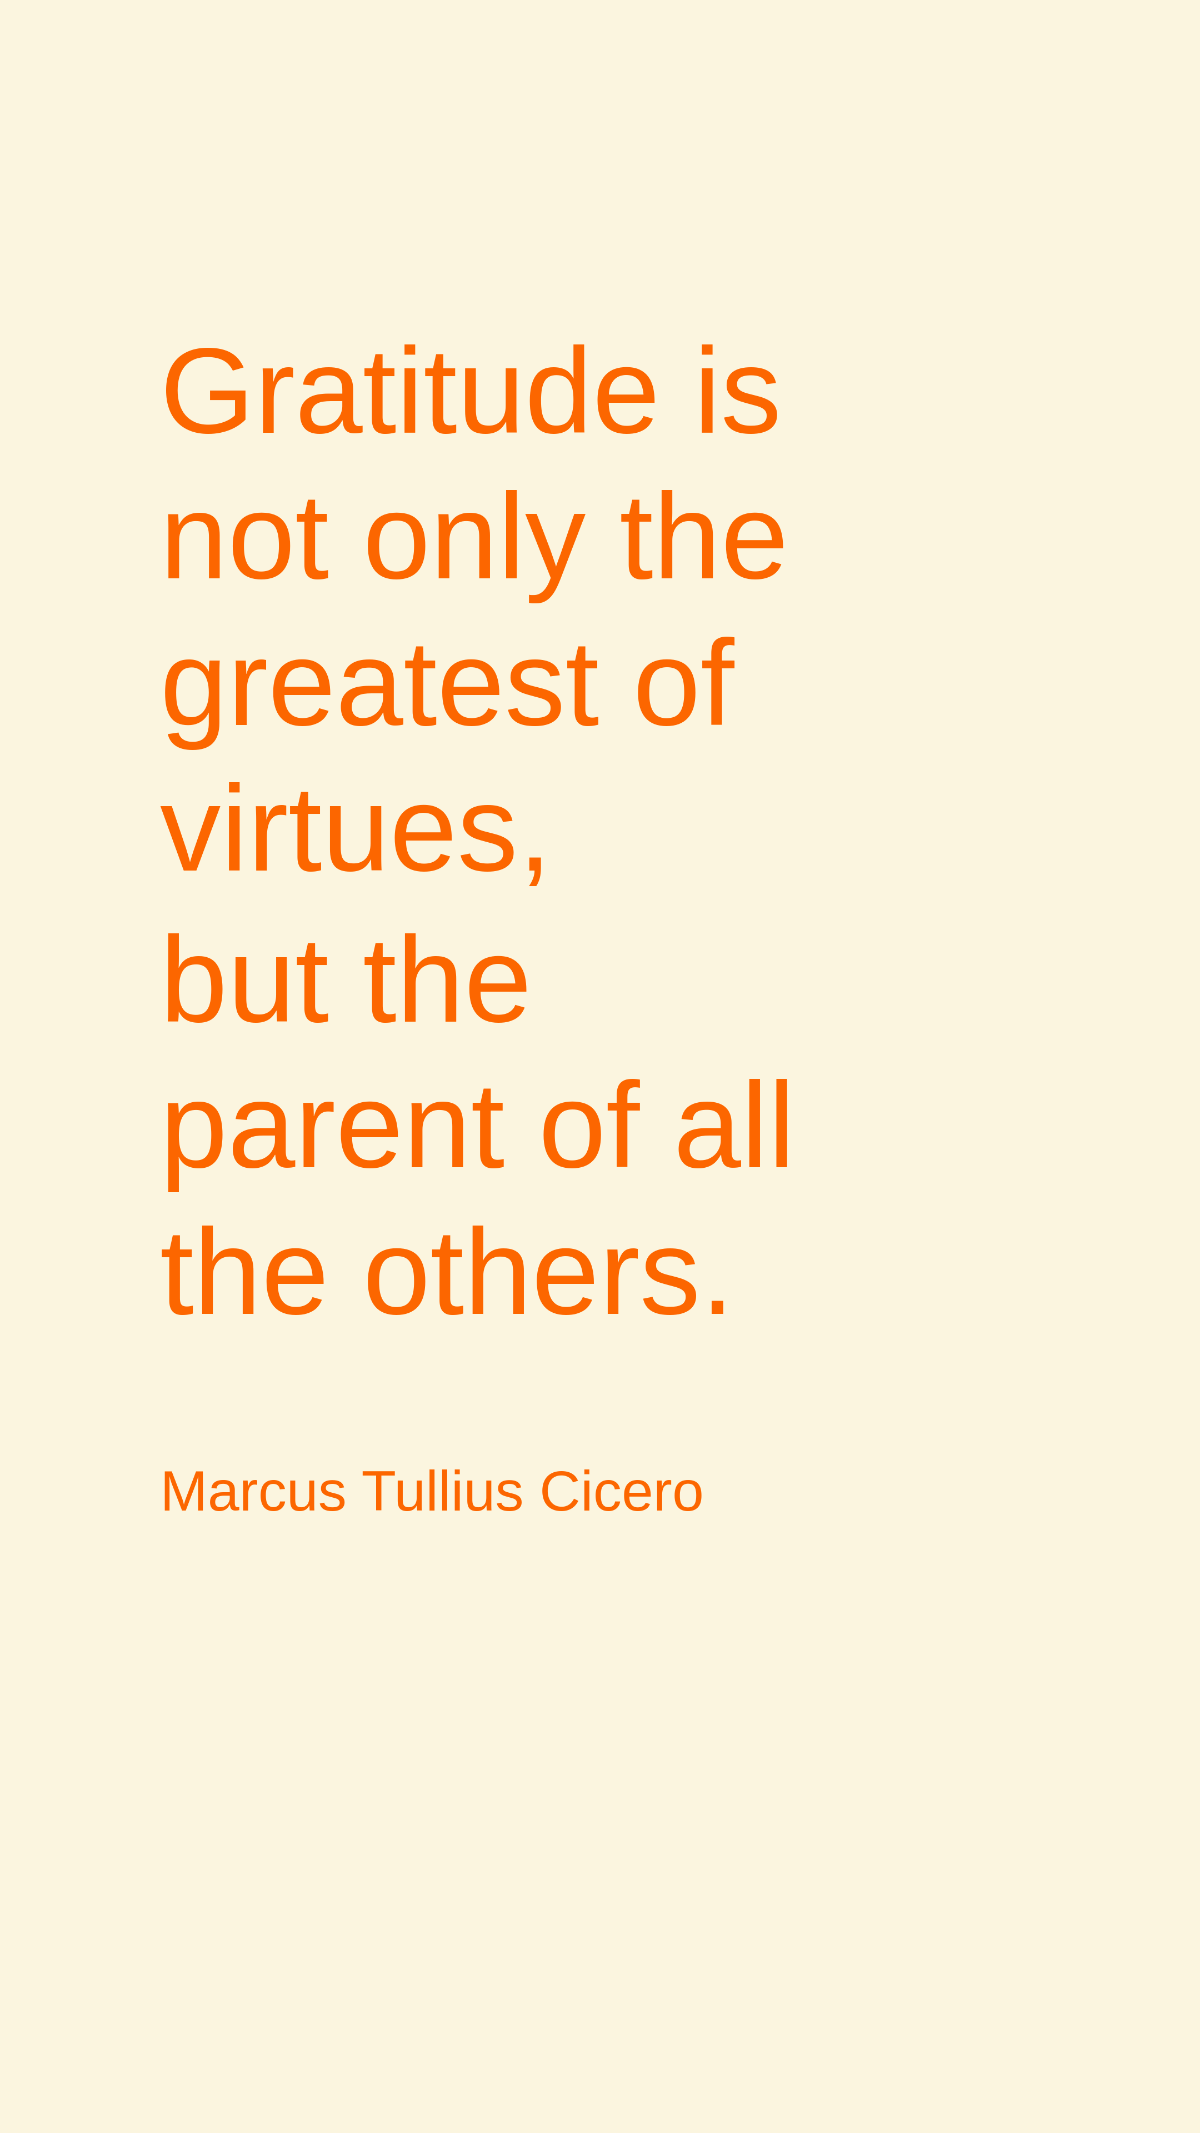 Free Marcus Tullius Cicero - Gratitude is not only the greatest of virtues, but the parent of all the others. Template